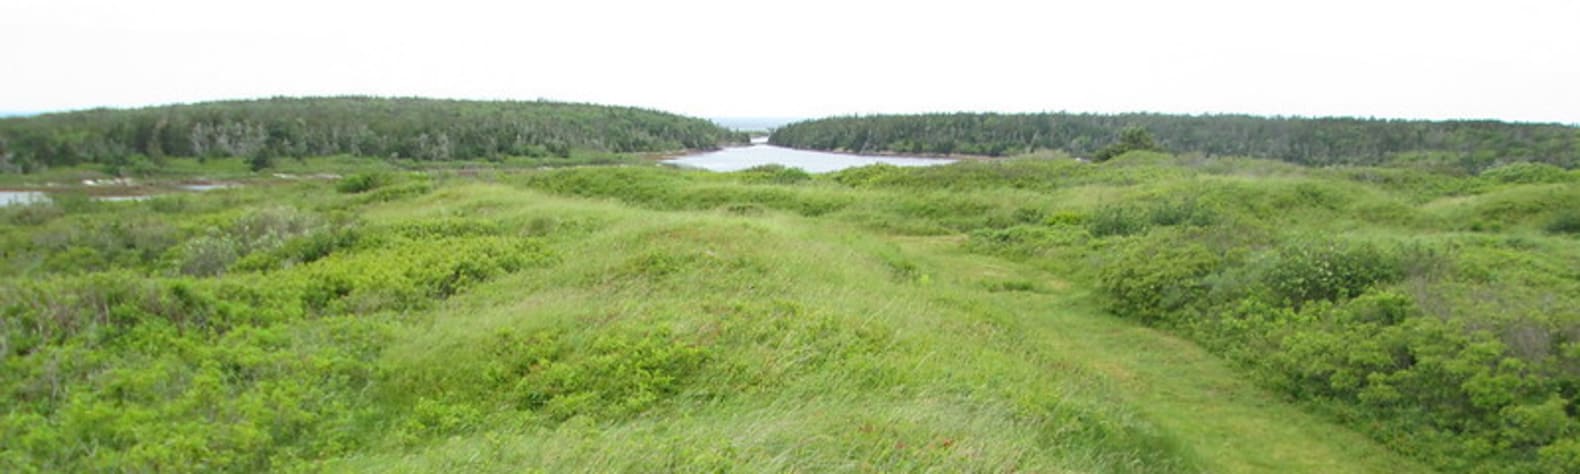 Grassy Island Fort National Historic Site